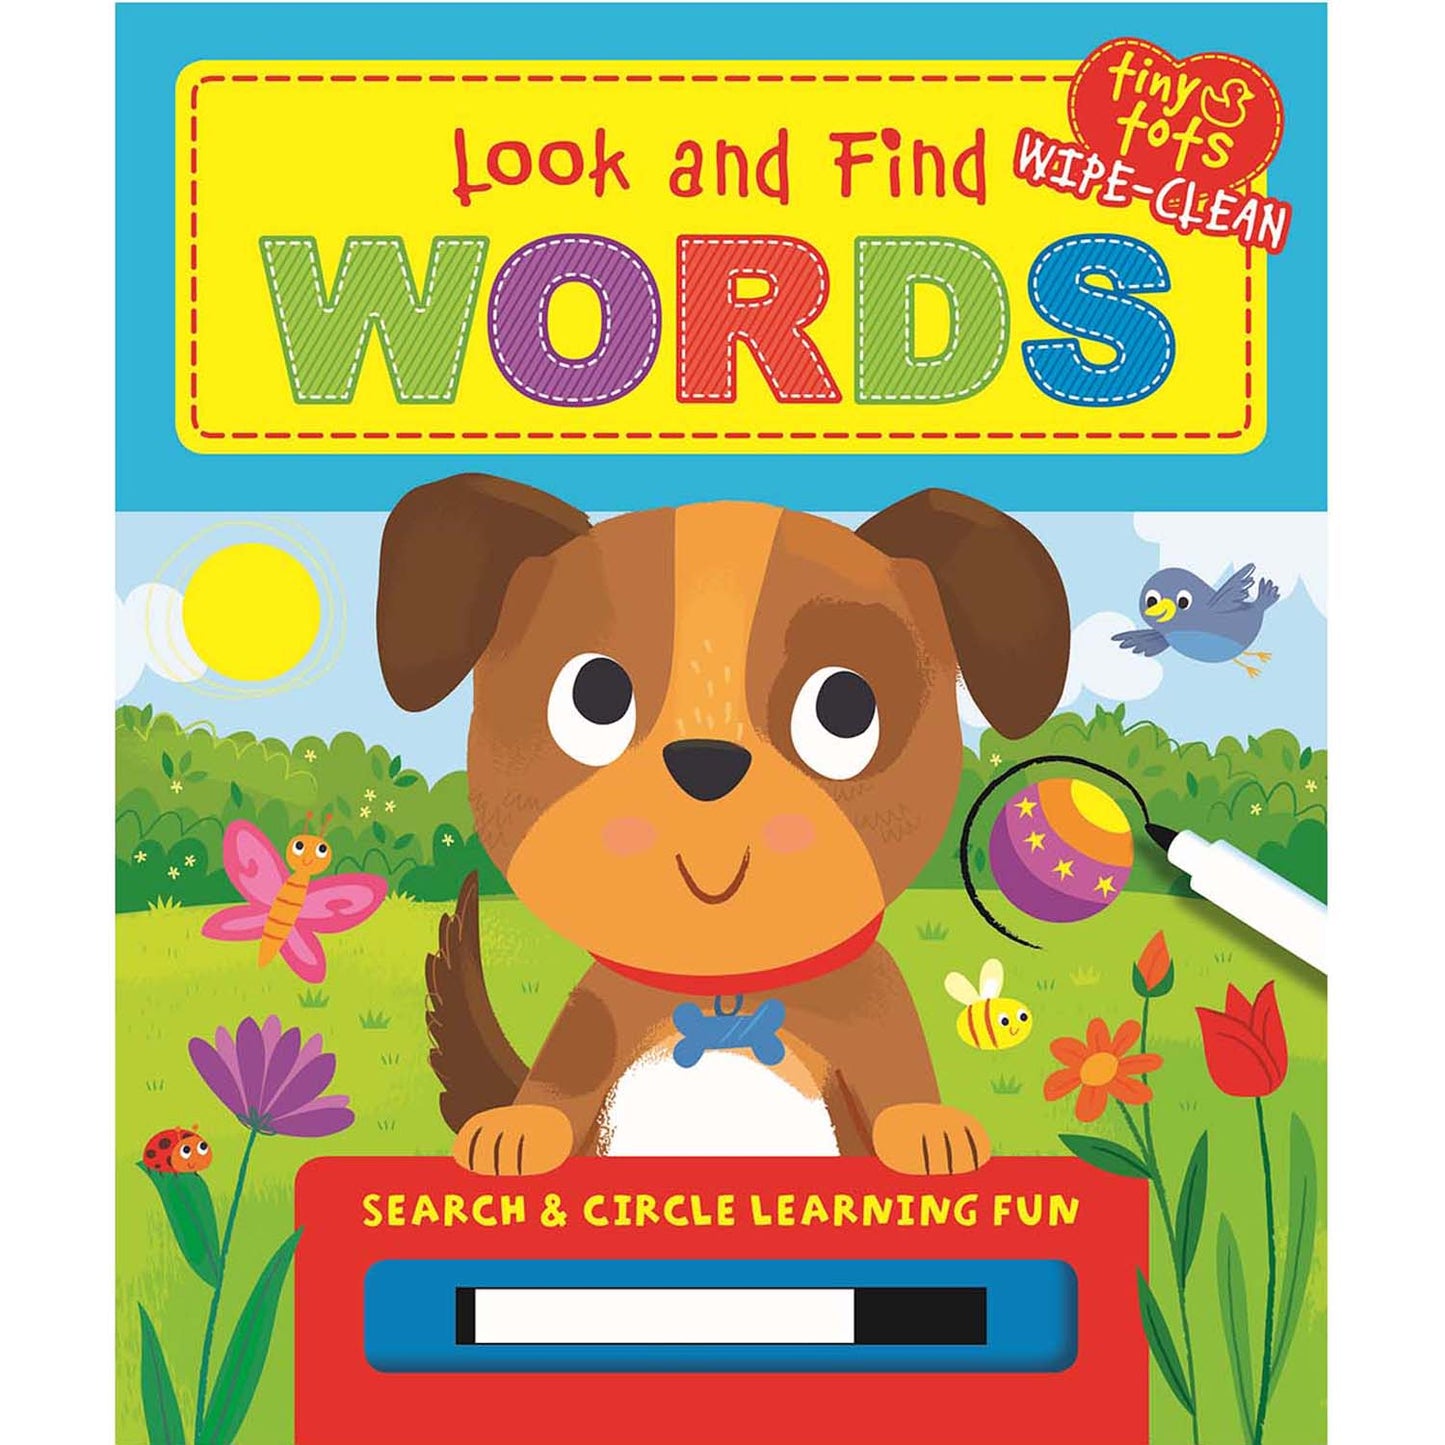 Look And Find Words (Tiny Tots Wipe - Clean)